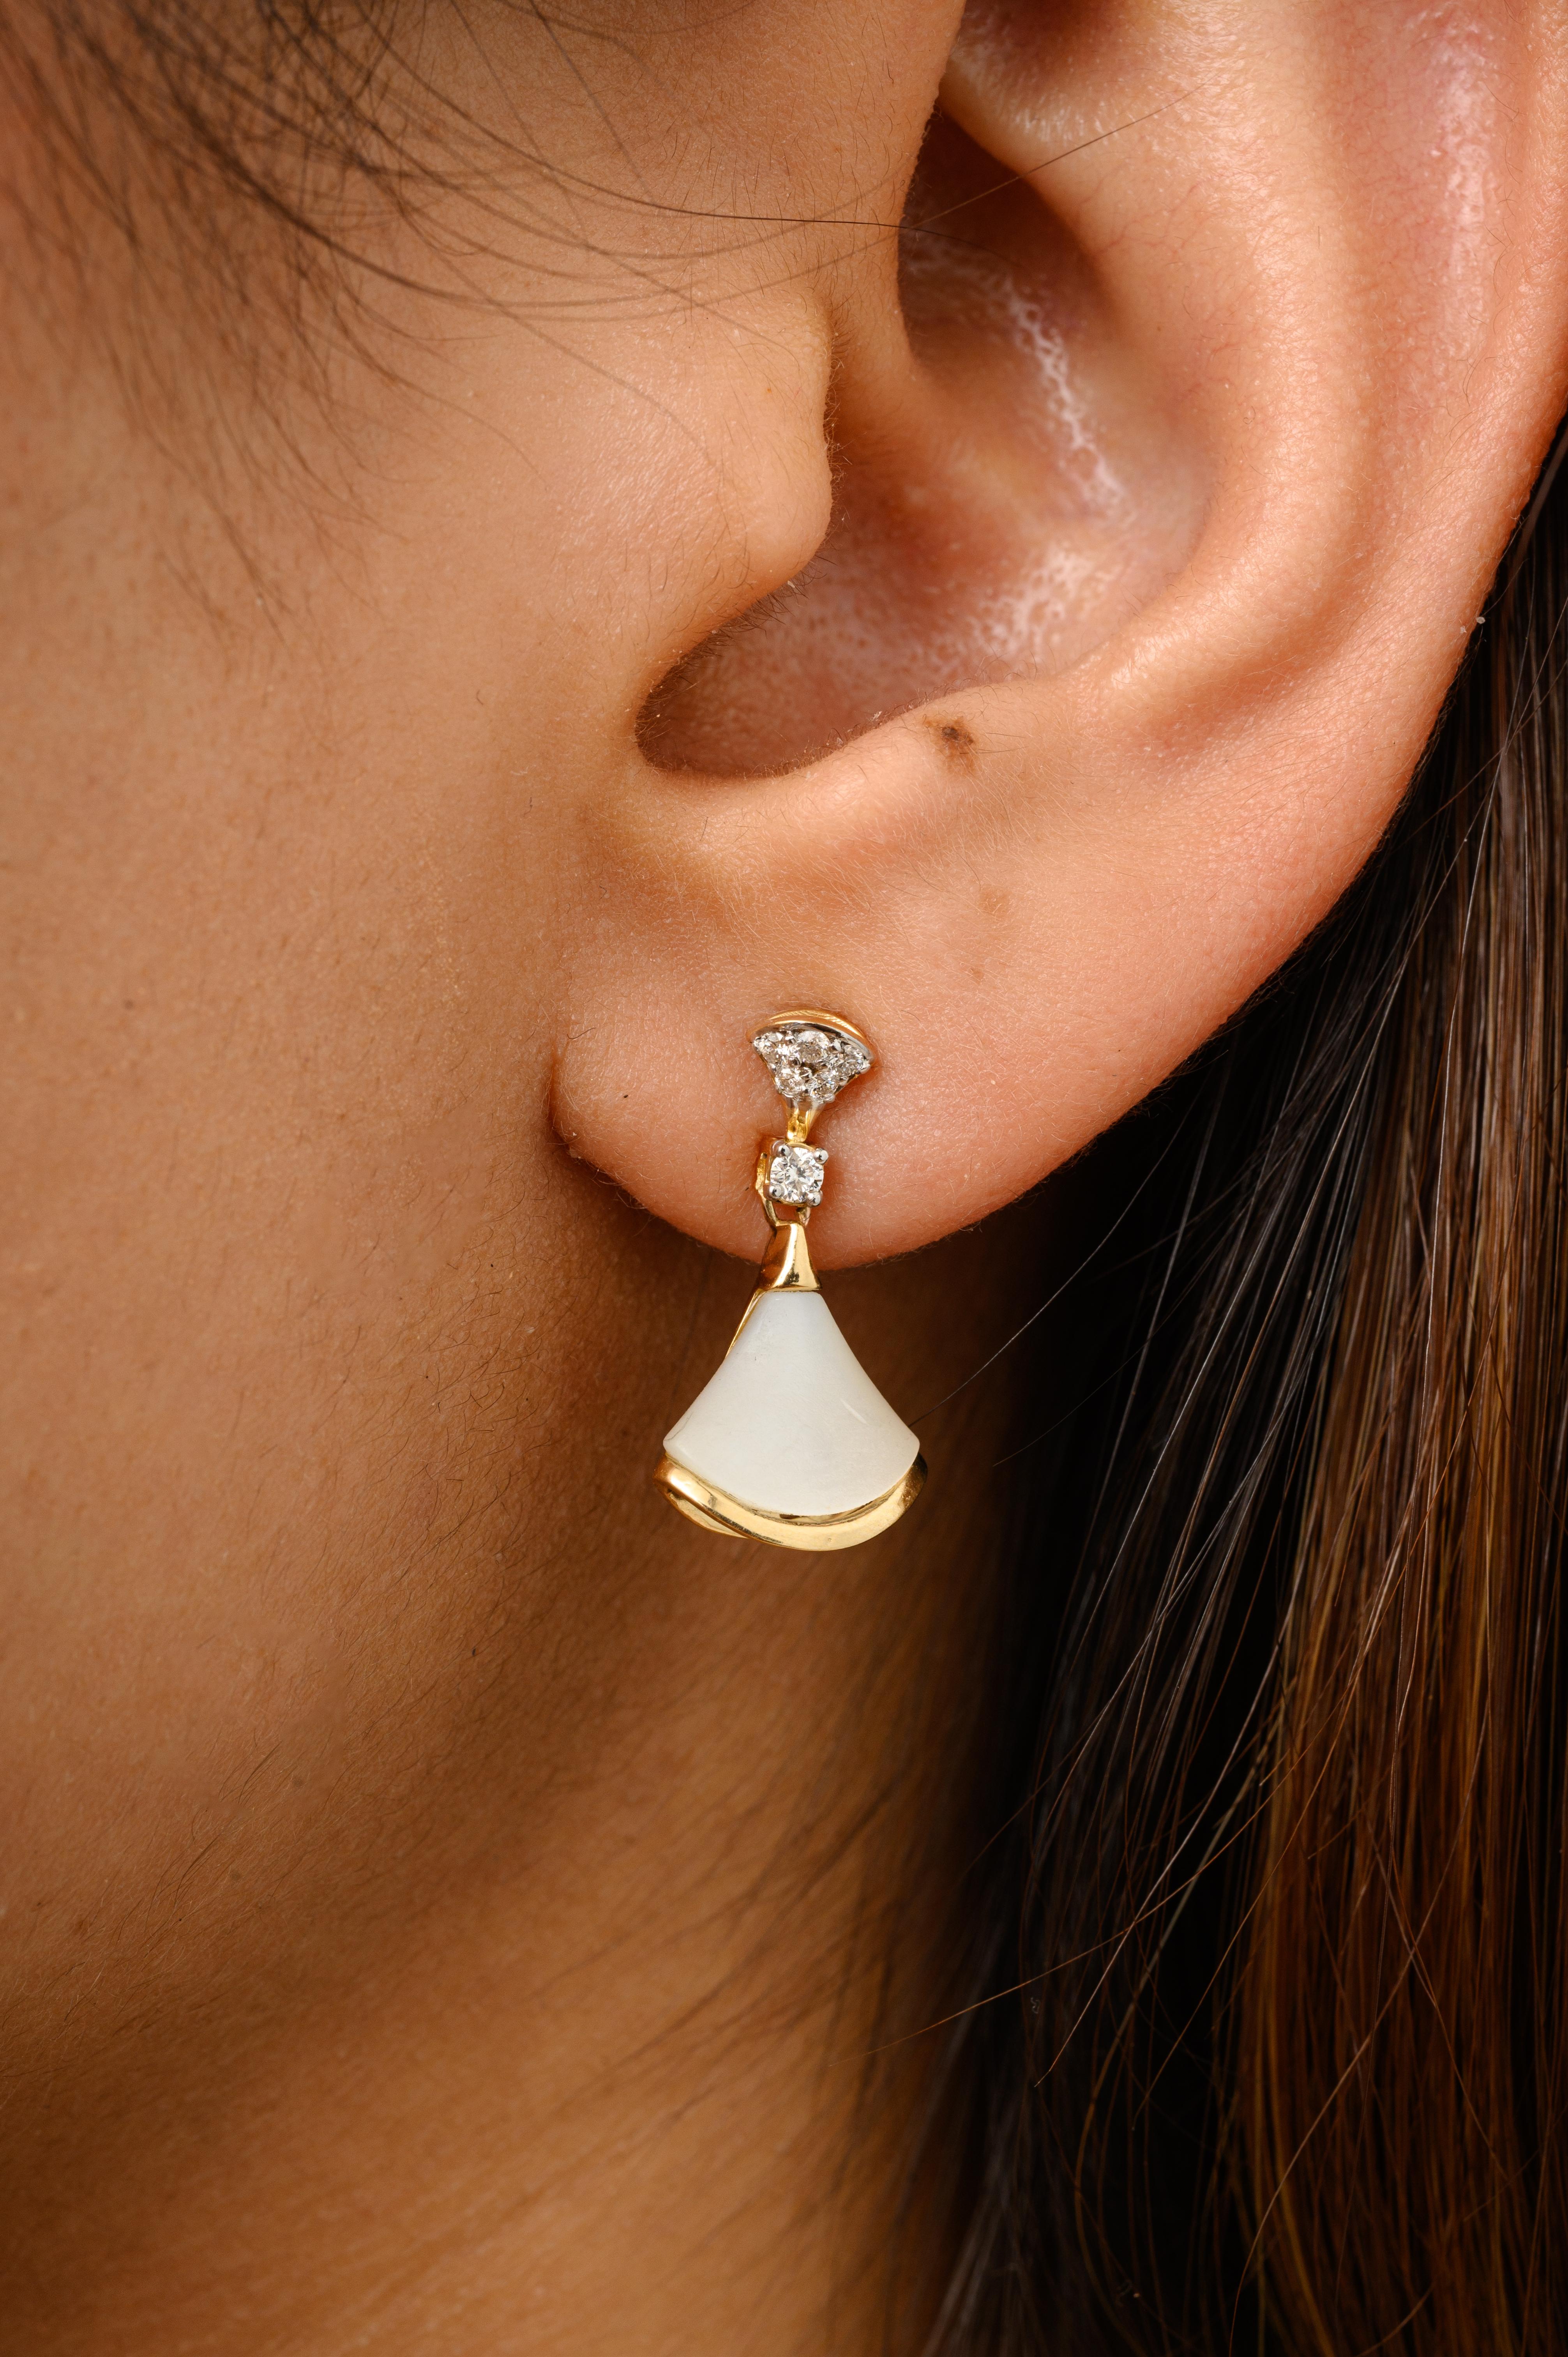 Fan Shape Mother of Pearl and Diamond Dangle Earrings in 18K Gold to make a statement with your look. You shall need dangle drop earrings to make a statement with your look. These earrings create a sparkling, luxurious look featuring fan shape